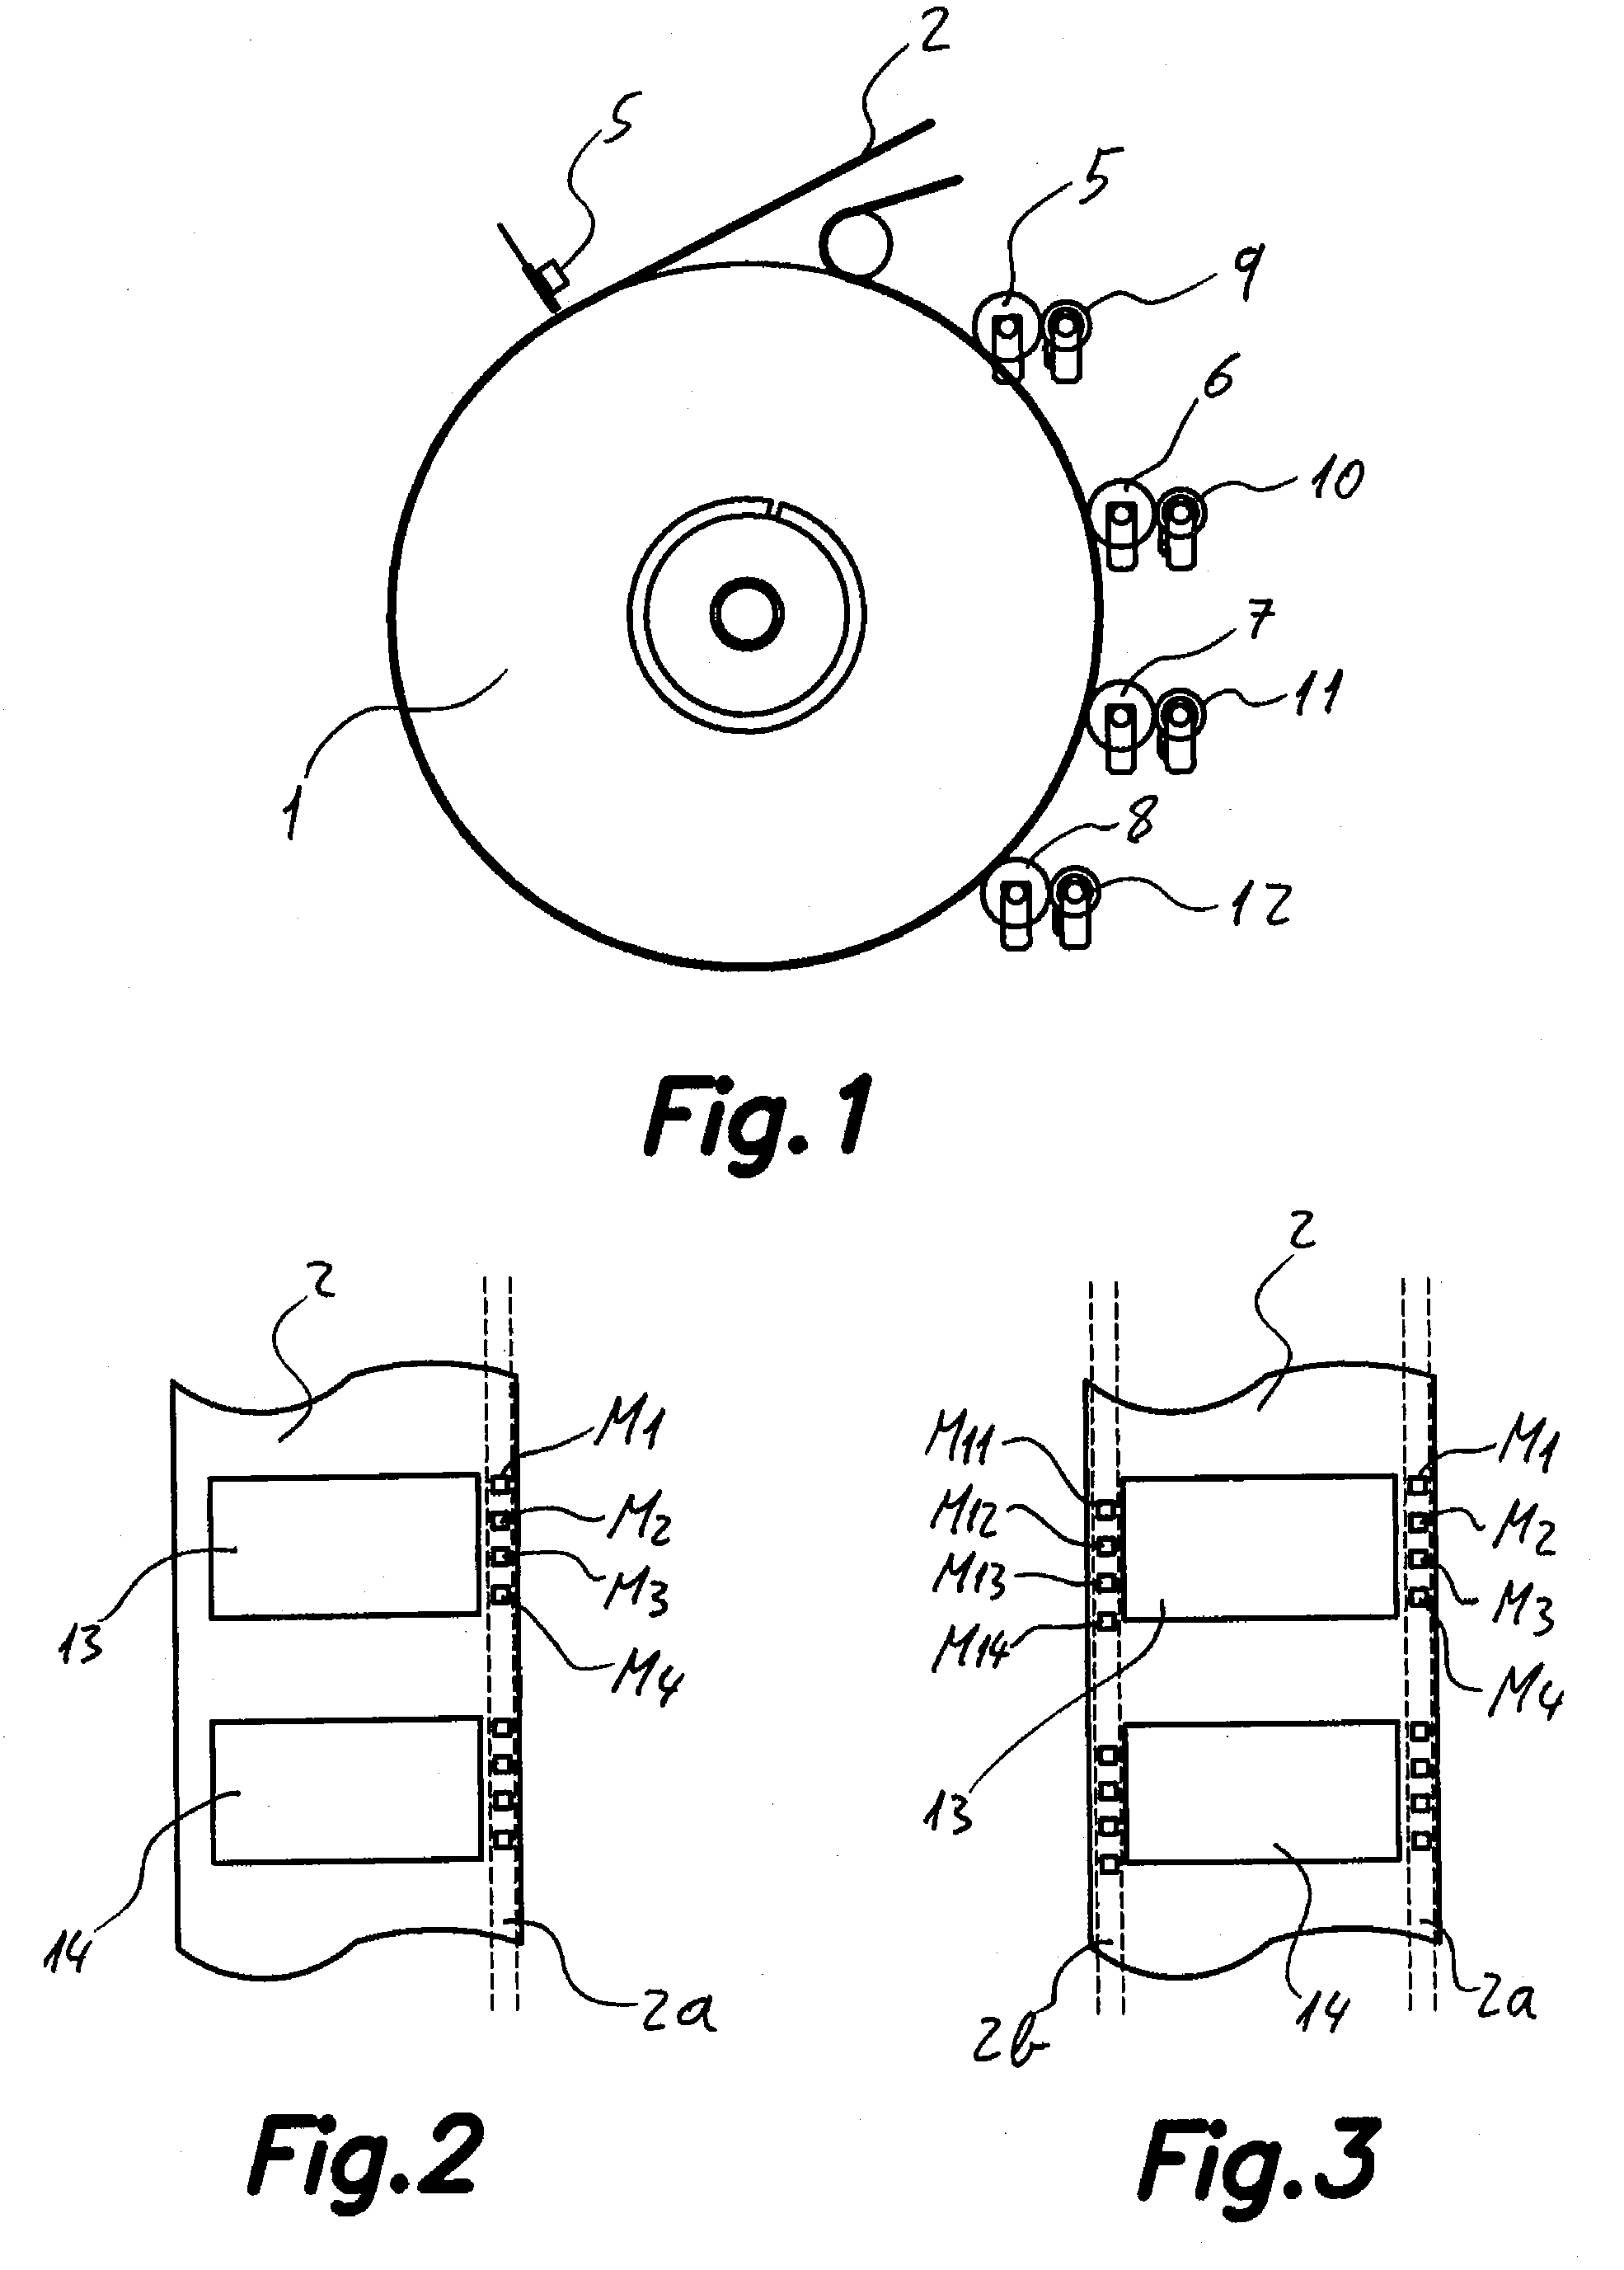 Method of automatically adjusting the printing pressure in flexographic printing machines